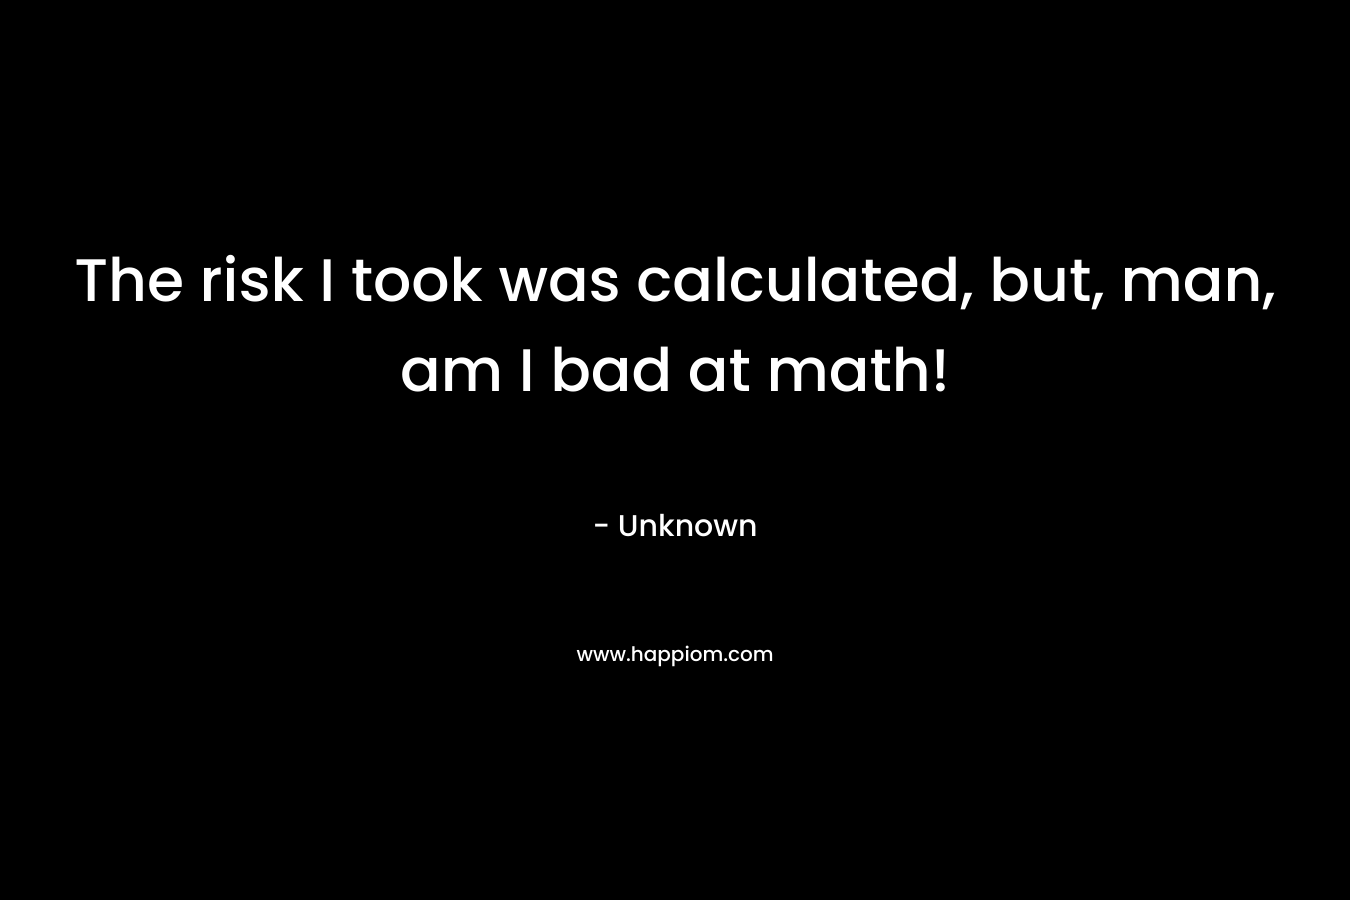 The risk I took was calculated, but, man, am I bad at math!